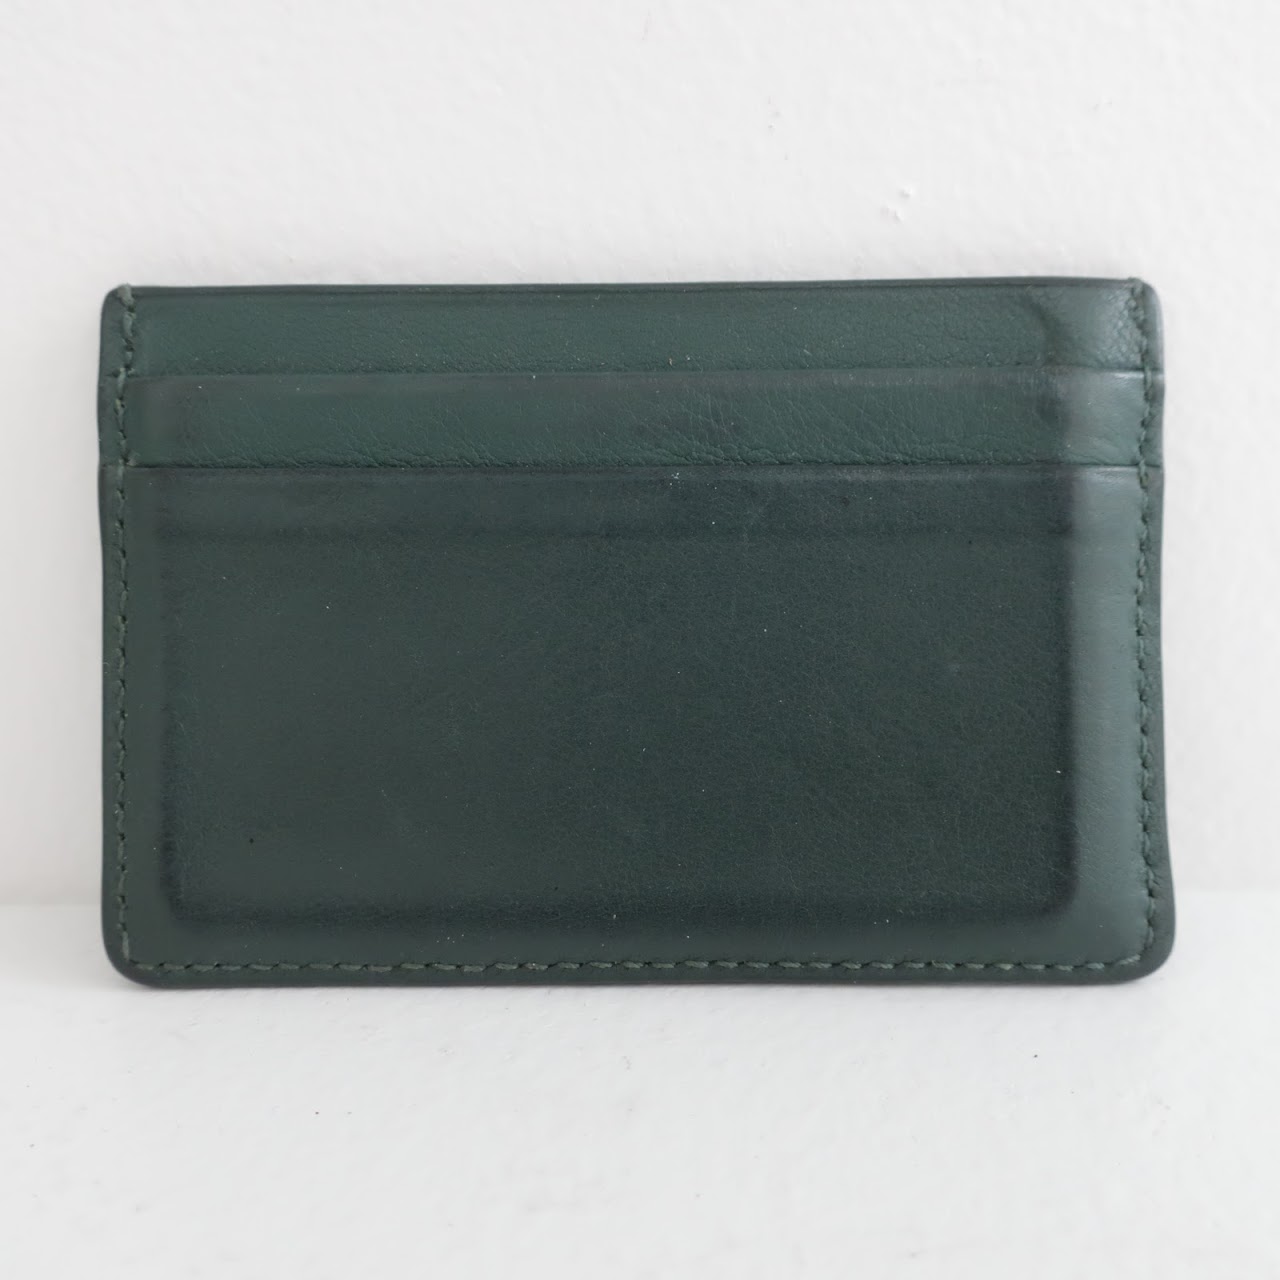 Tiffany & Co. Green Leather Card Wallet